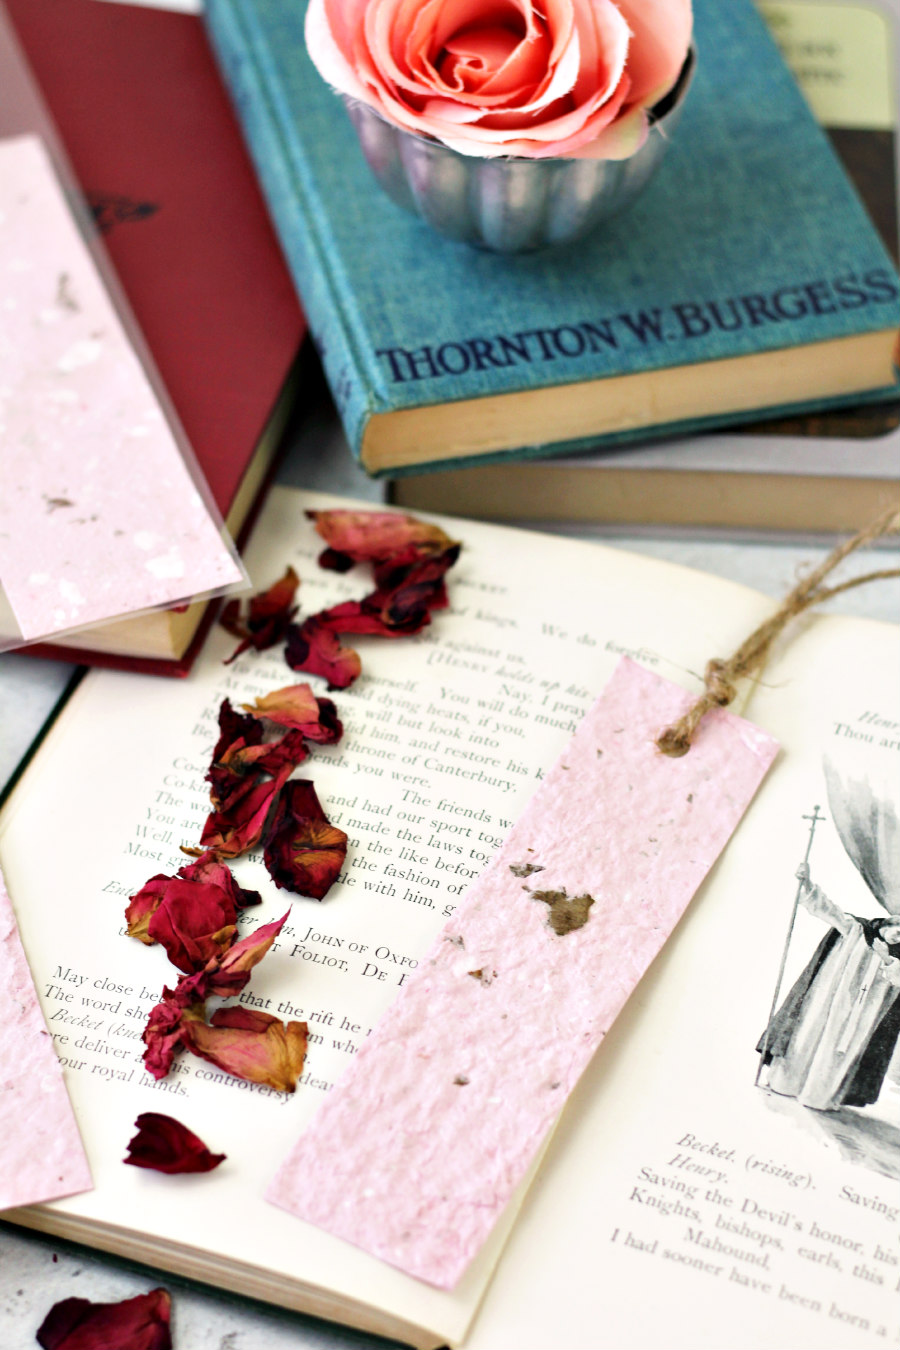 Floral Rose Recycled Upcycled Paper Handmade Bookmark - Dried Flowers - Cardstock - Book Lover - Reader from Holoka Home on Etsy. Pink paper bookmark sits on top of old open book with dried rose petals next to it.